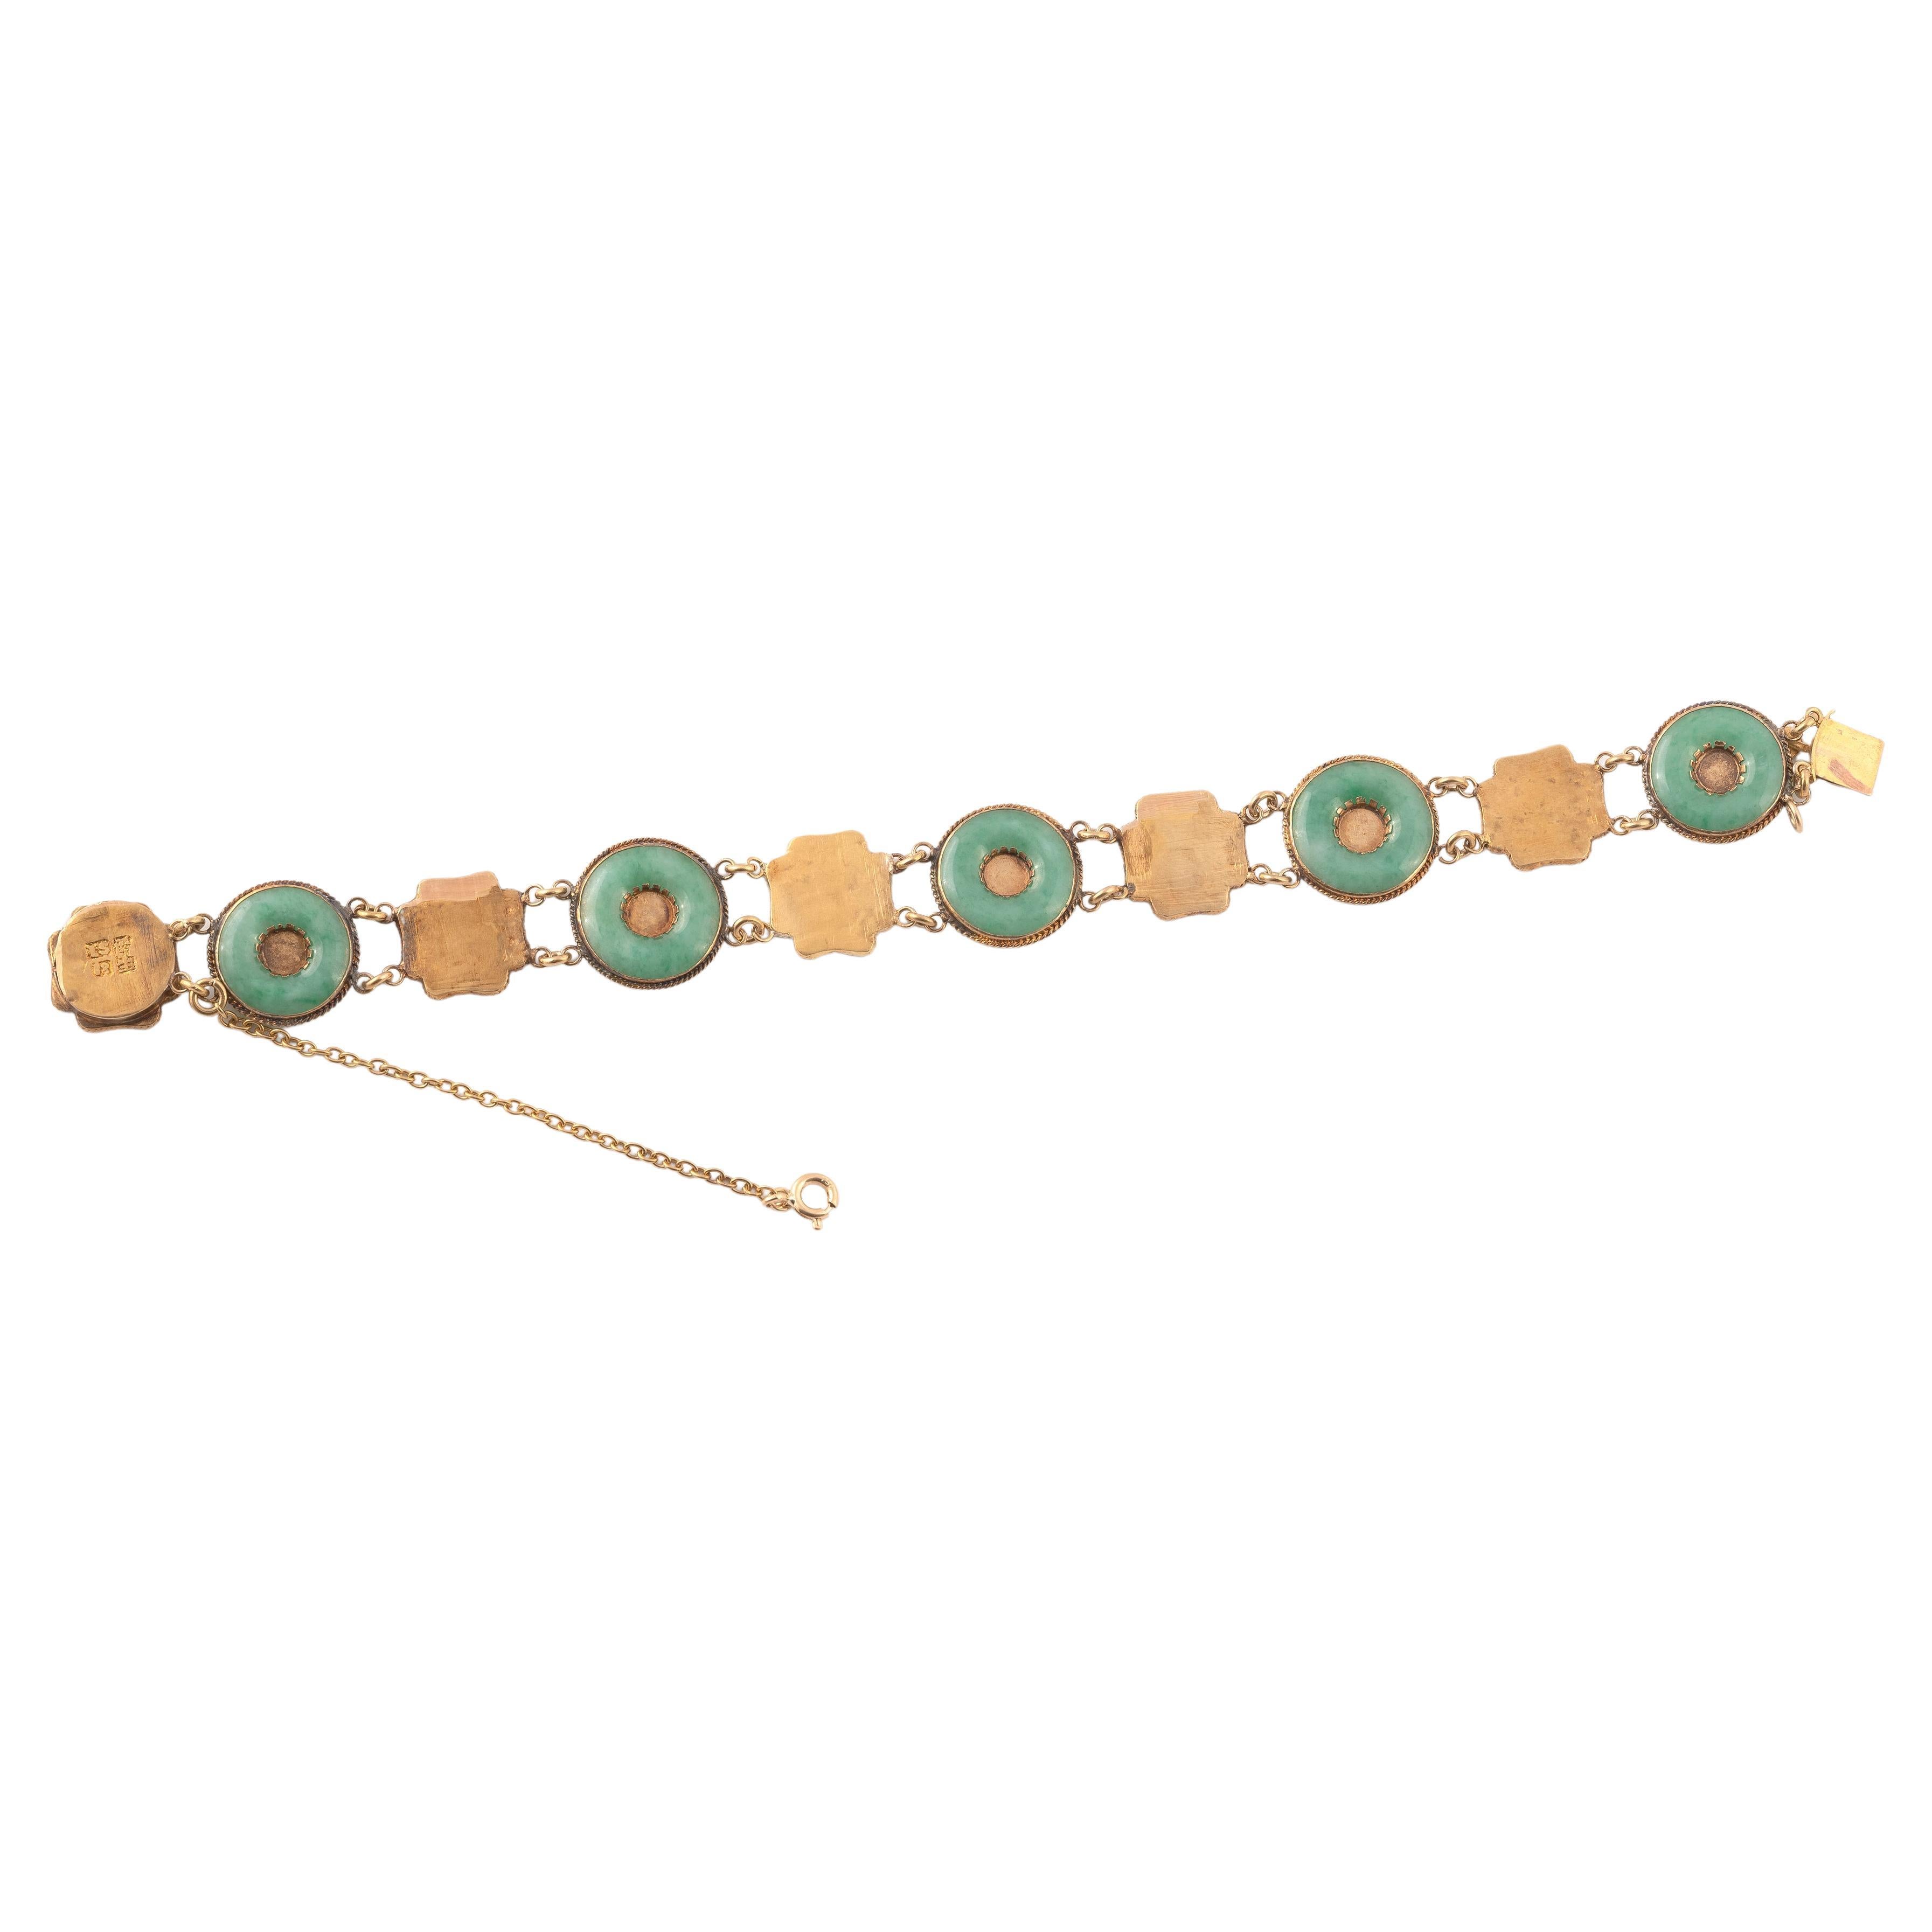 Flexible bracelet, composed of jadeite jade discs alternated with quadrilobed links in guilloché yellow gold surmounted by Chinese characters. Length: 19.5cm. Weight: 14.8g.